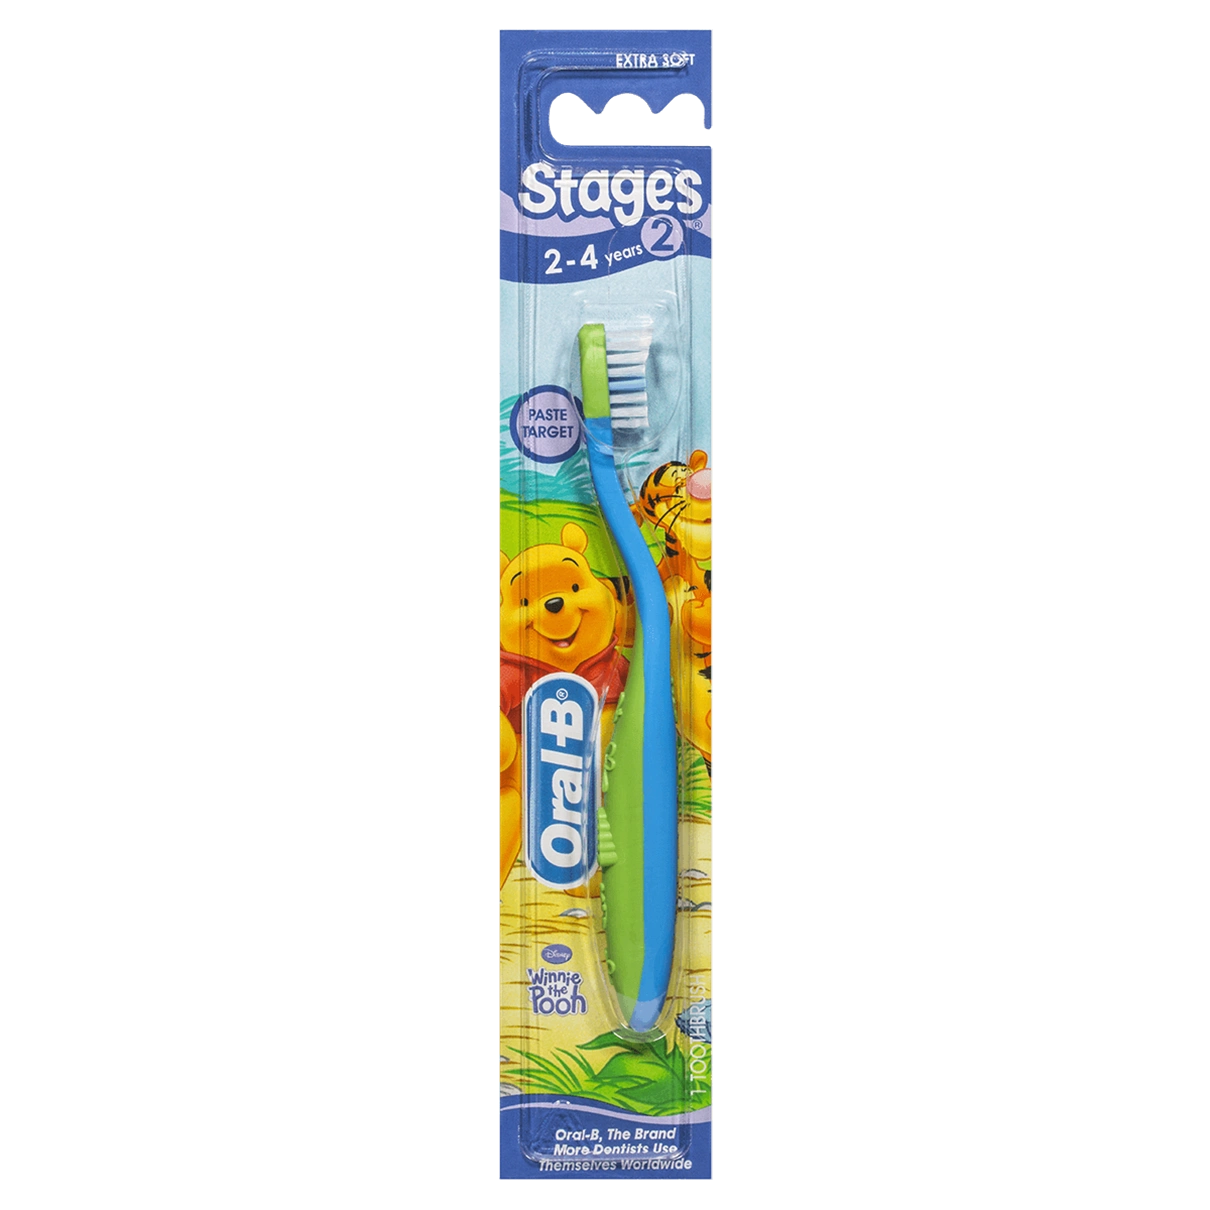 Oral B Stages 2 2-4 Years Toothbrush